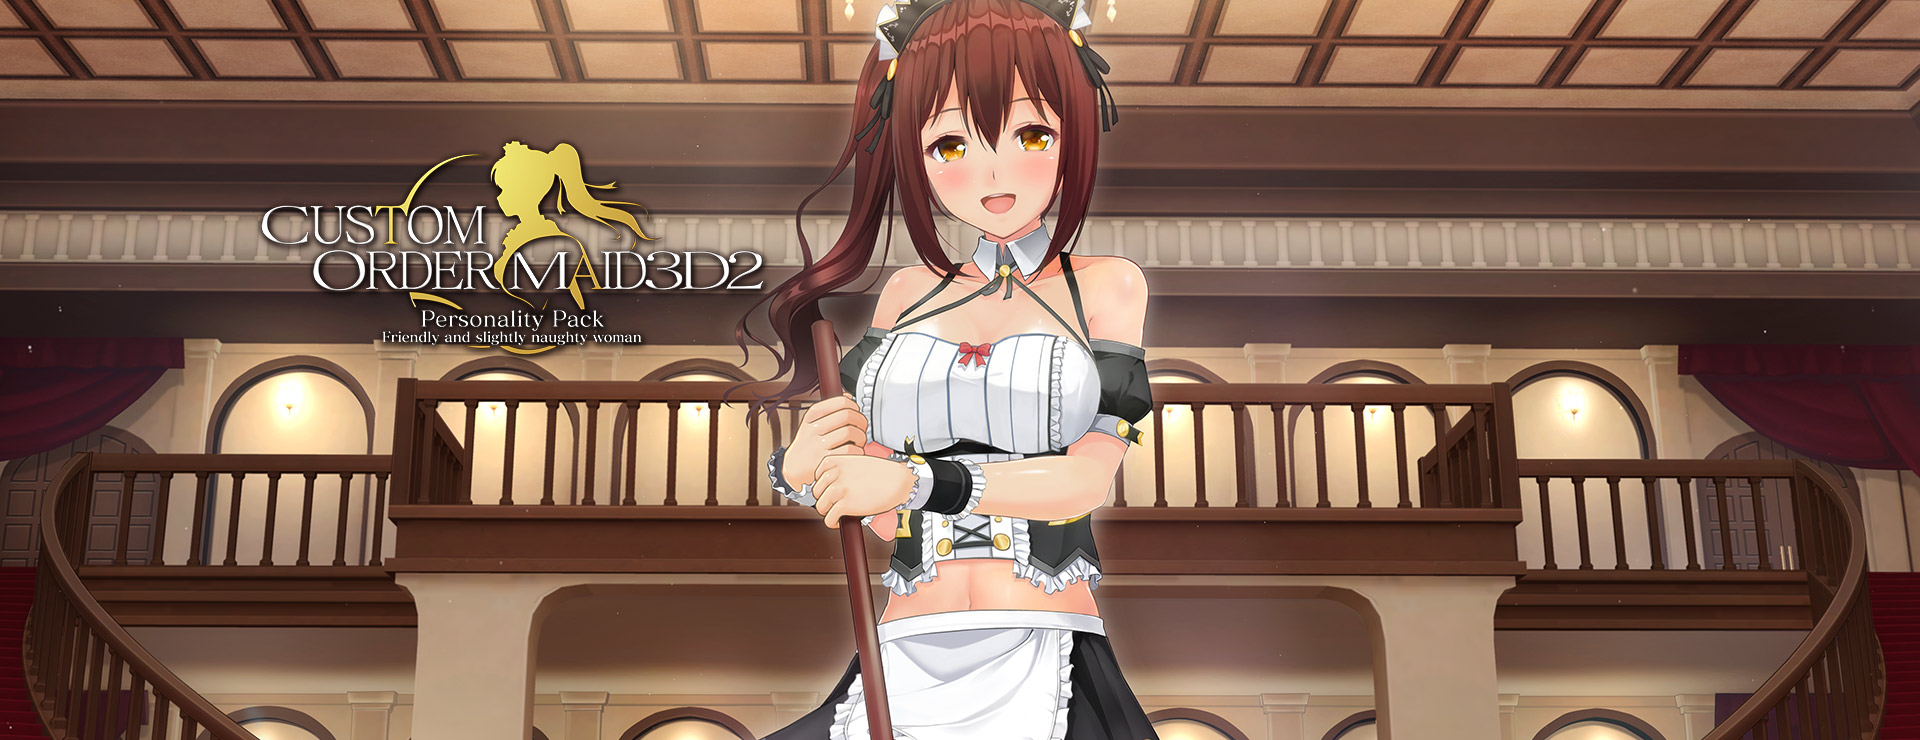 Custom Order Maid 3D2: Friendly and Slightly Naughty Woman DLX Edition - Simulation Jeu